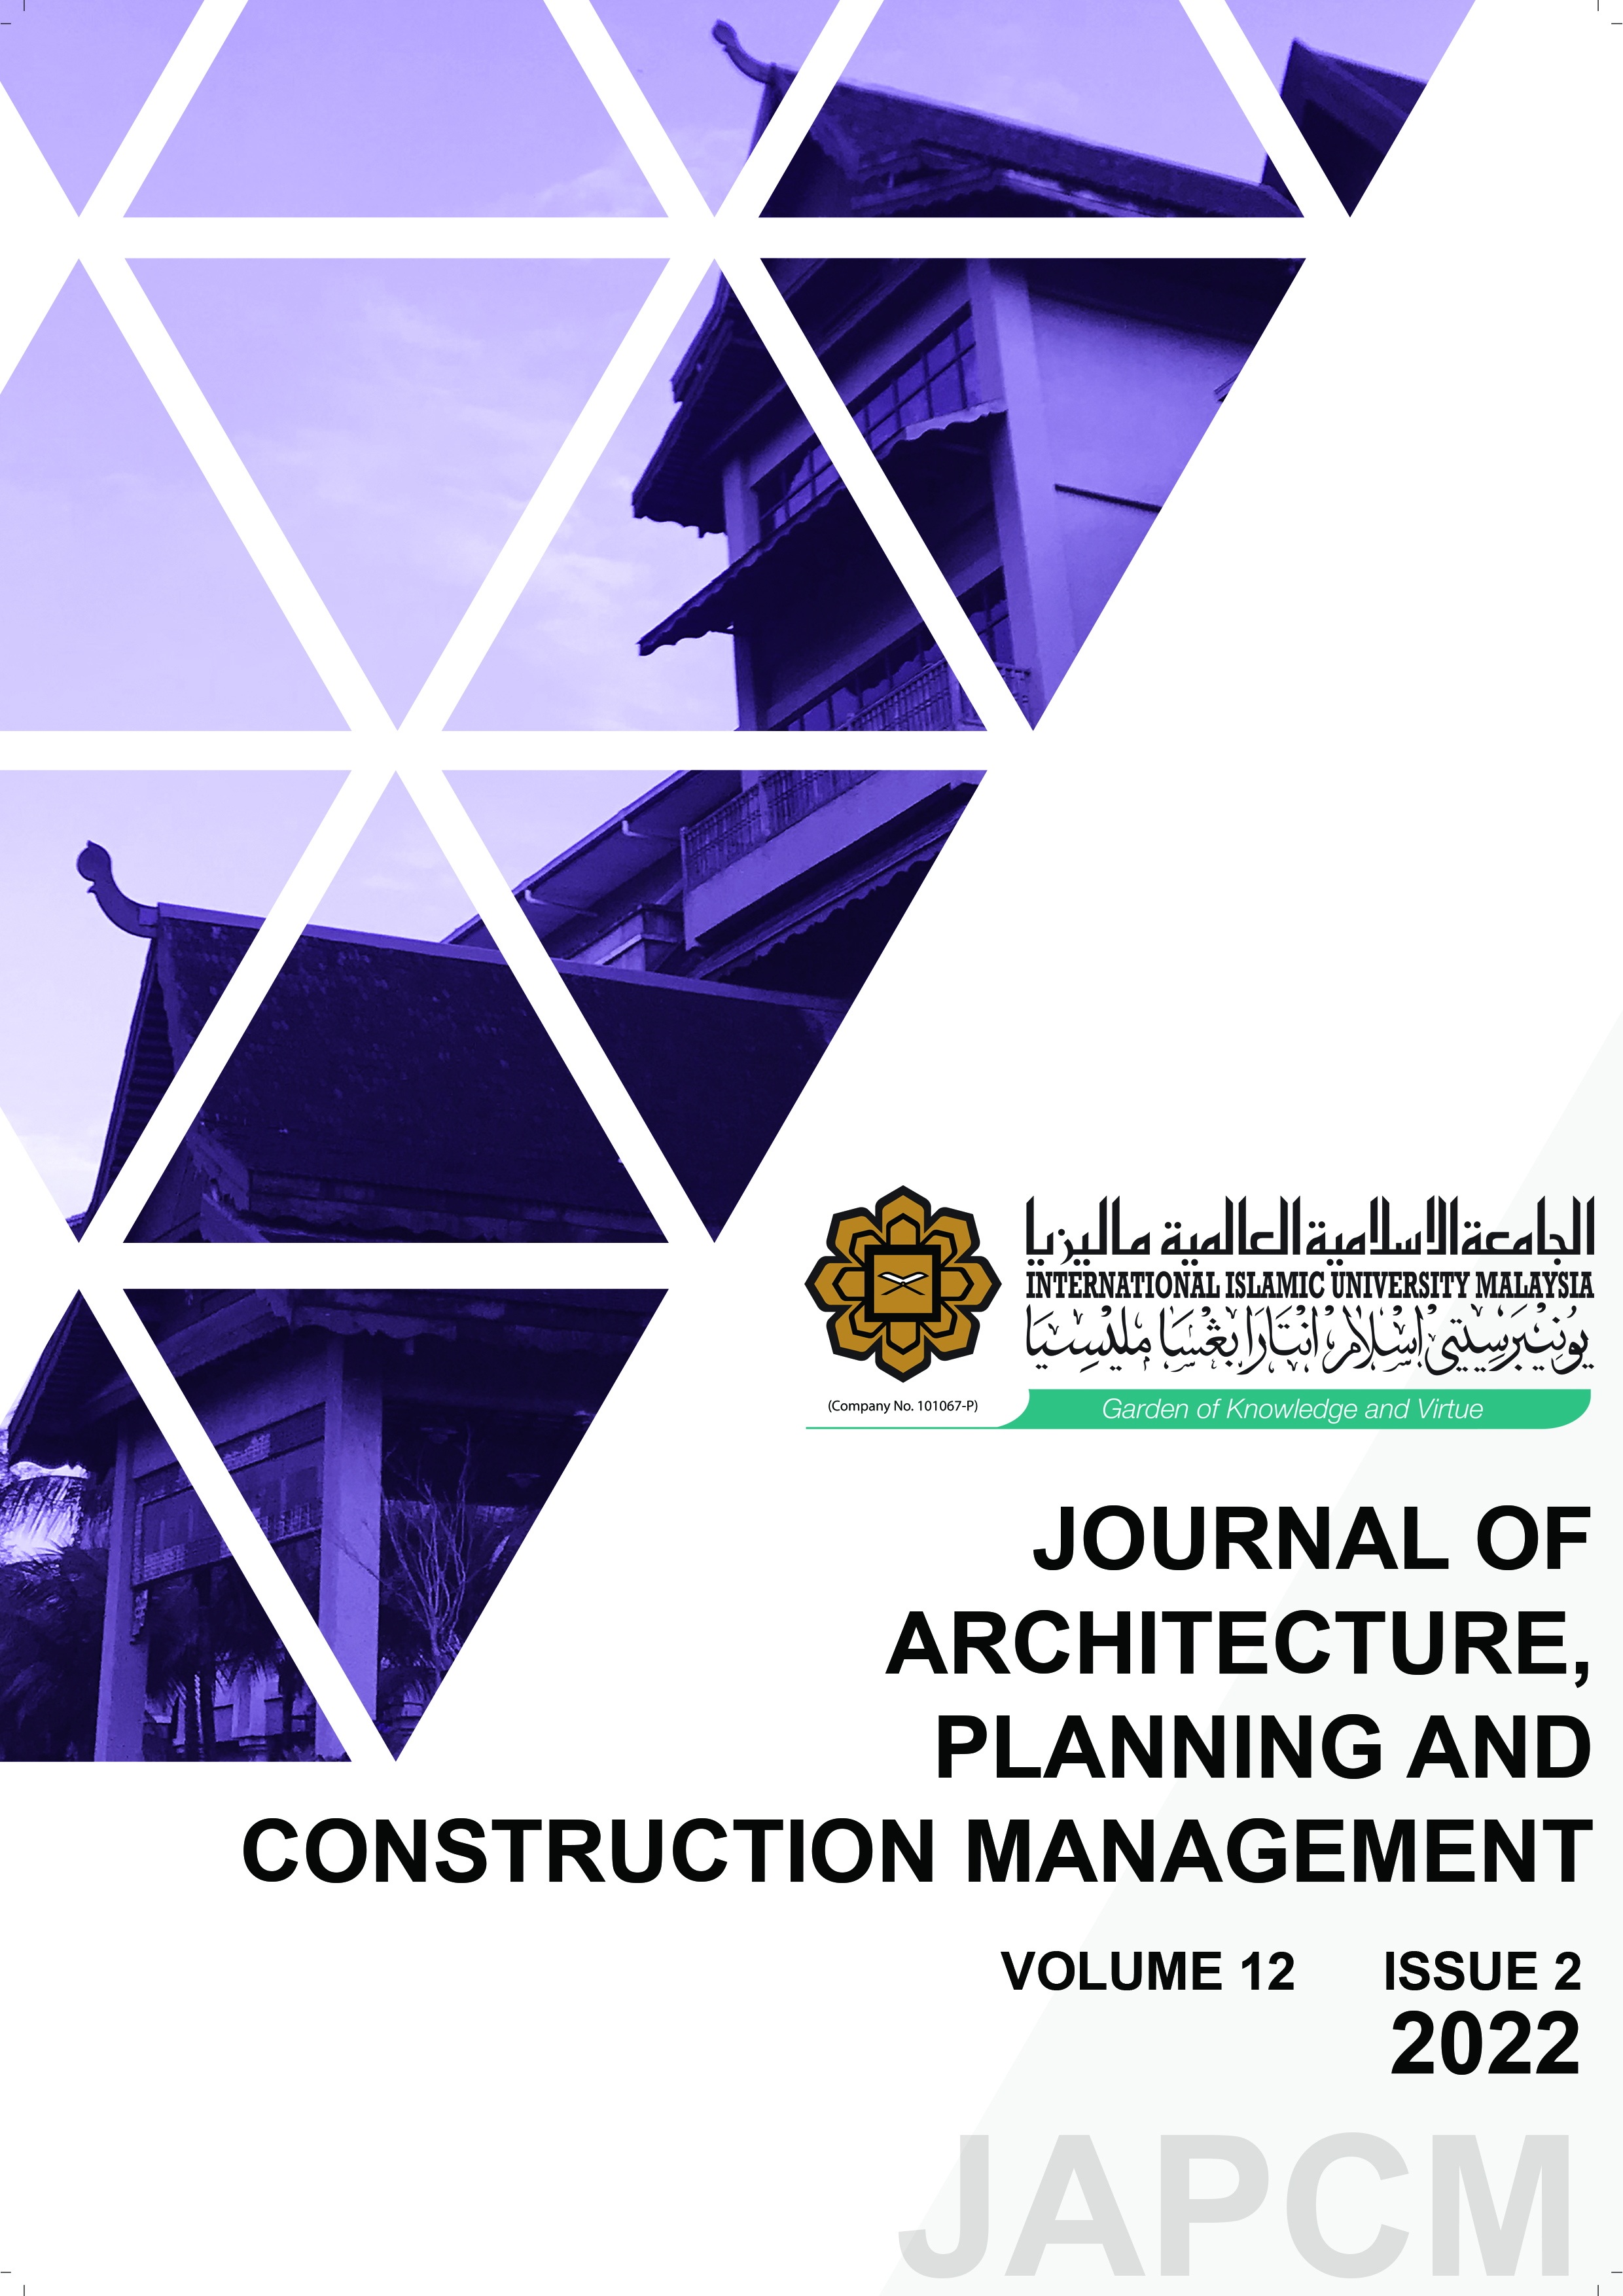 					View Vol. 12 No. 2 (2022): Journal of Architecture, Planning and Construction Management (JAPCM) 
				